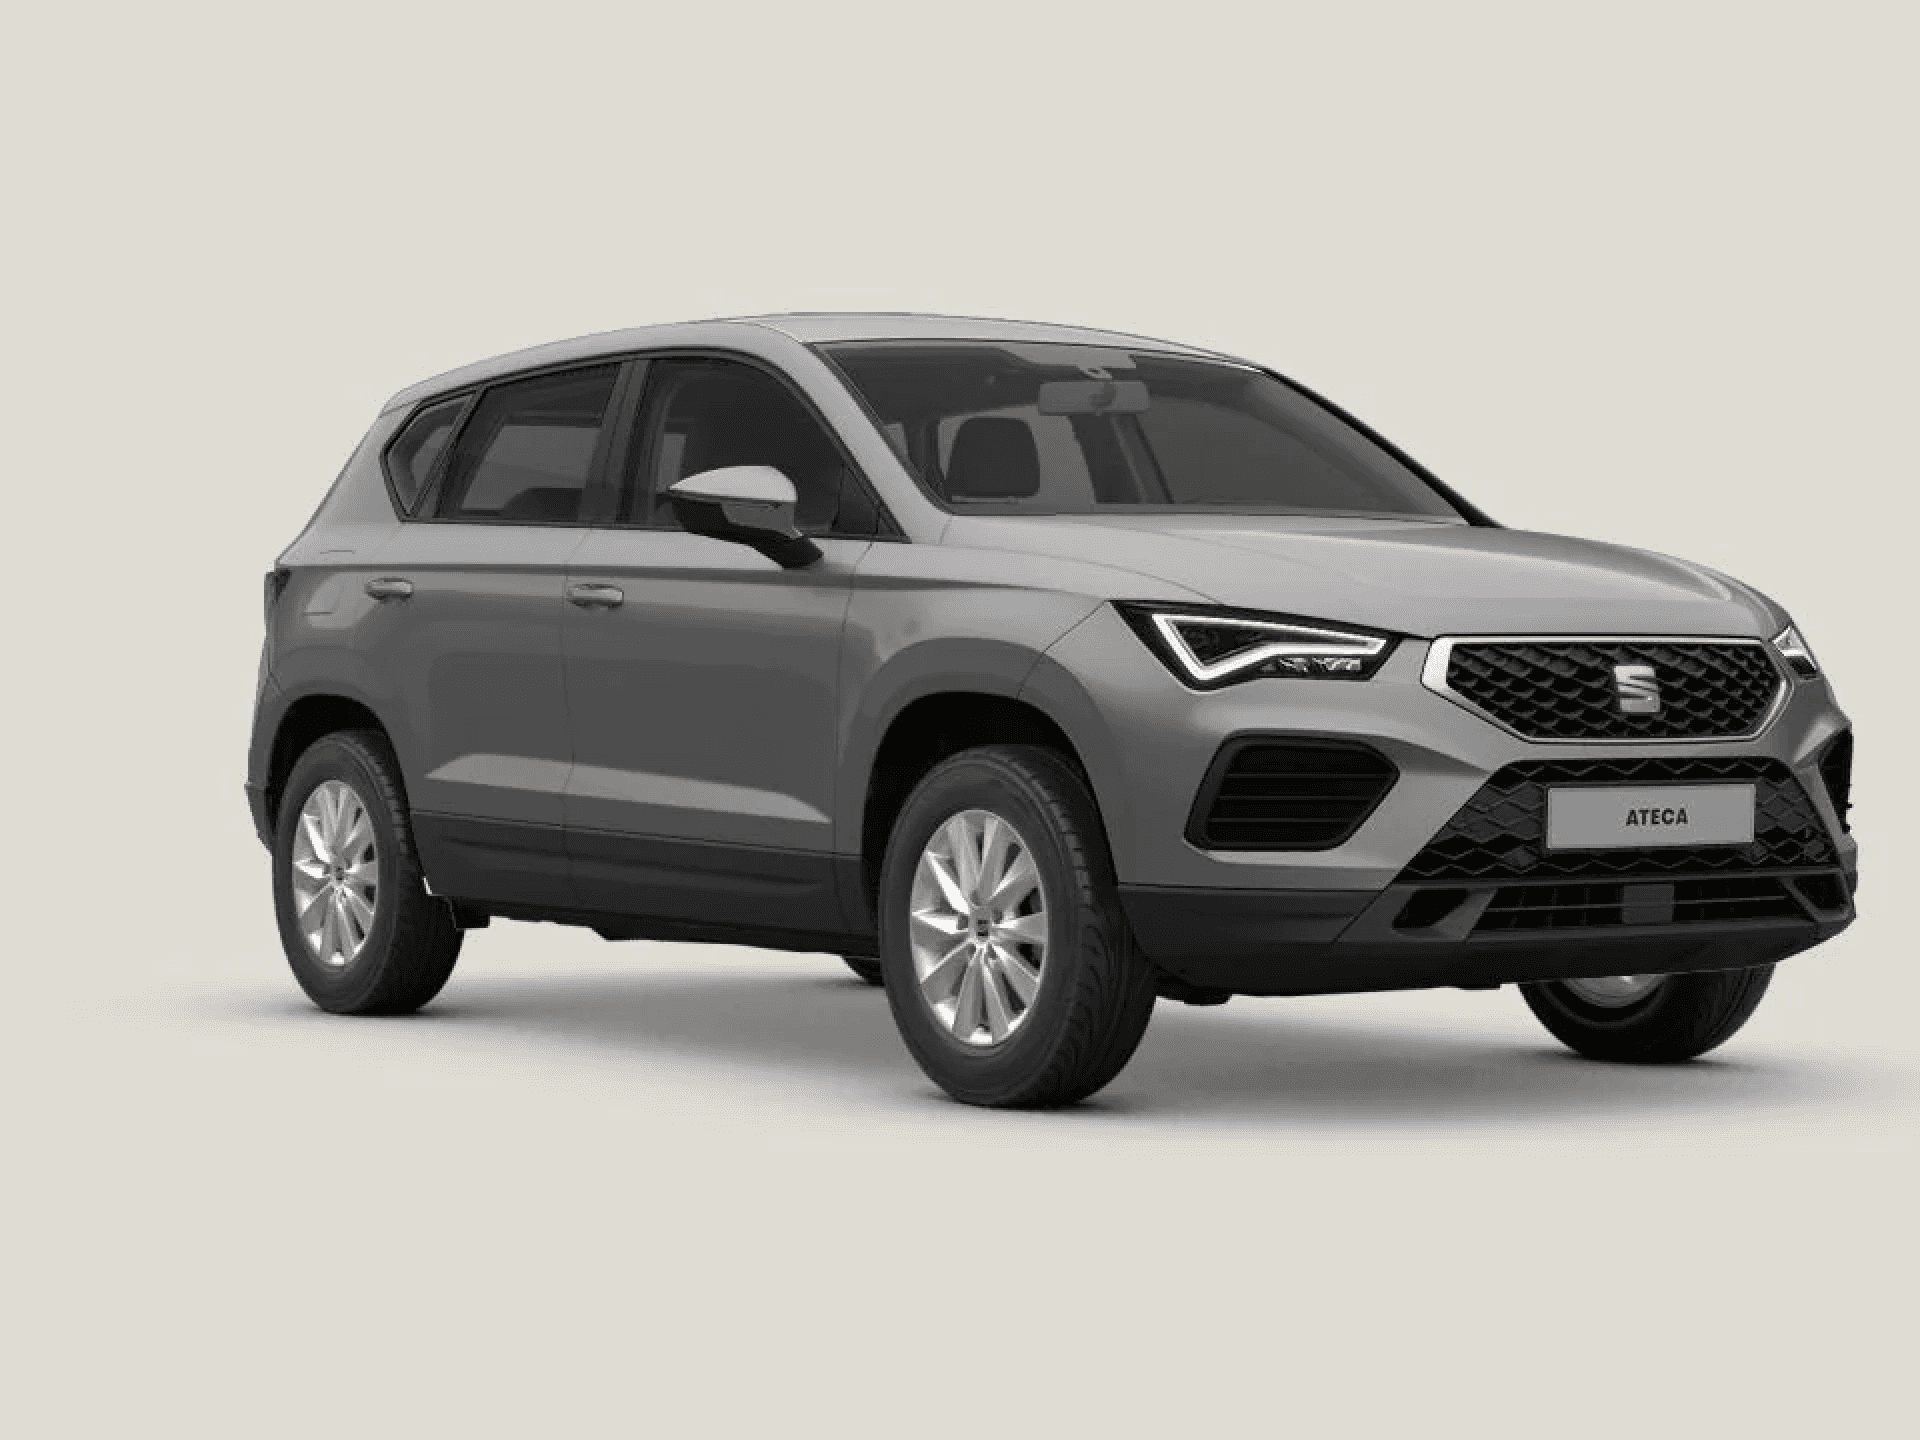 SEAT Ateca 1.0 TSI 81kW (110CV) St&Sp Reference